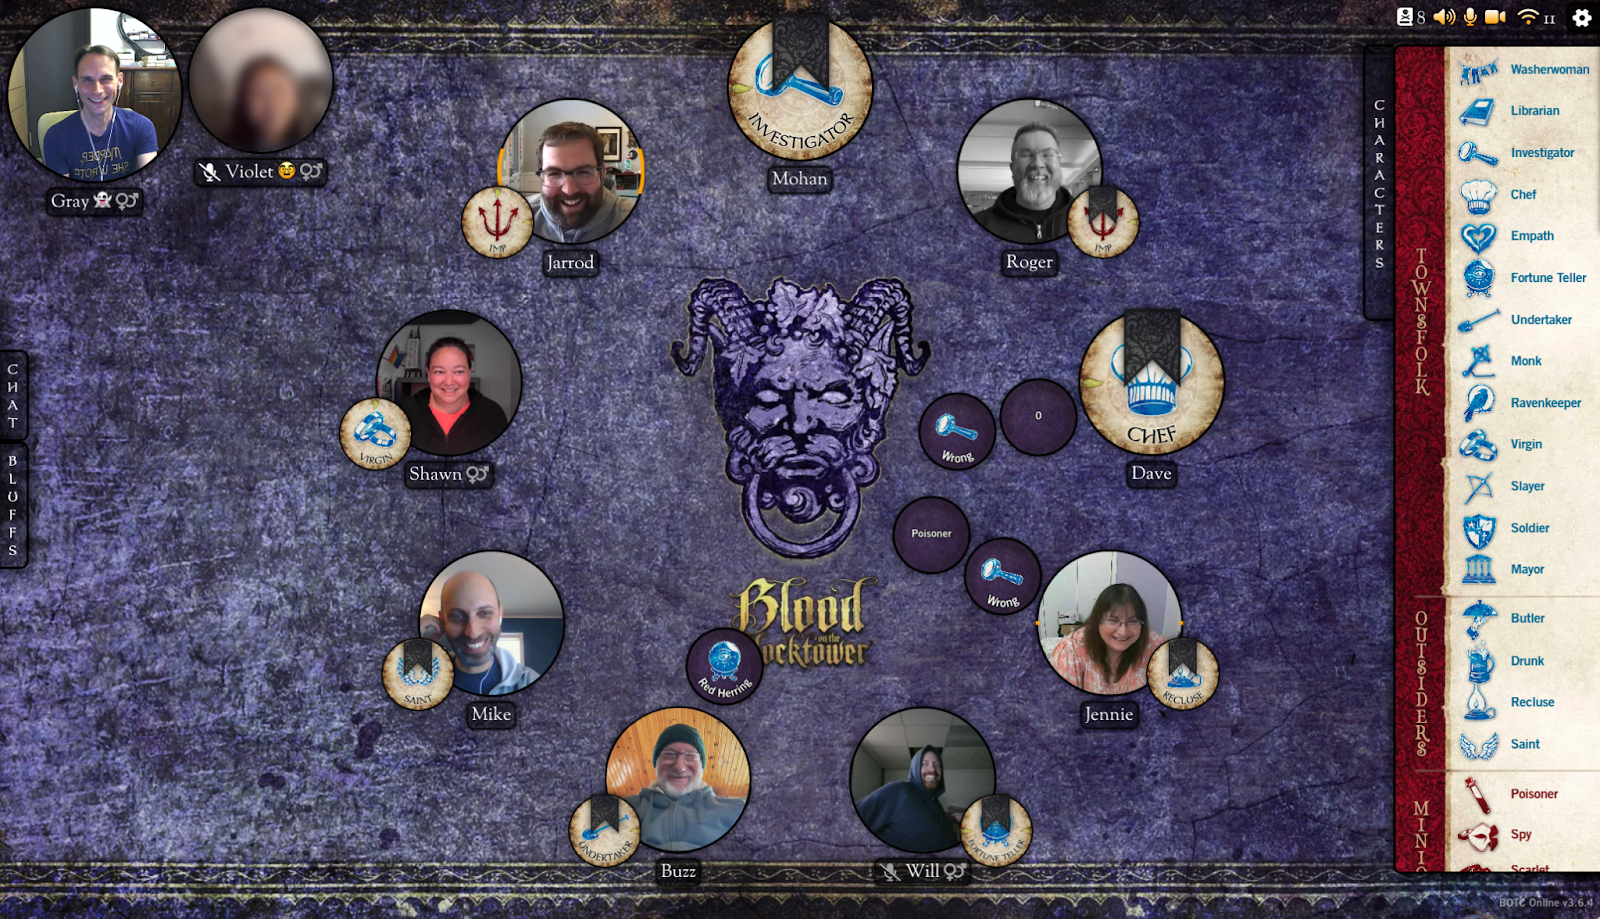 Screenshot of individual avatars of people playing an online game called Blood on the Clocktower, with an illustrated door knocker in the center.